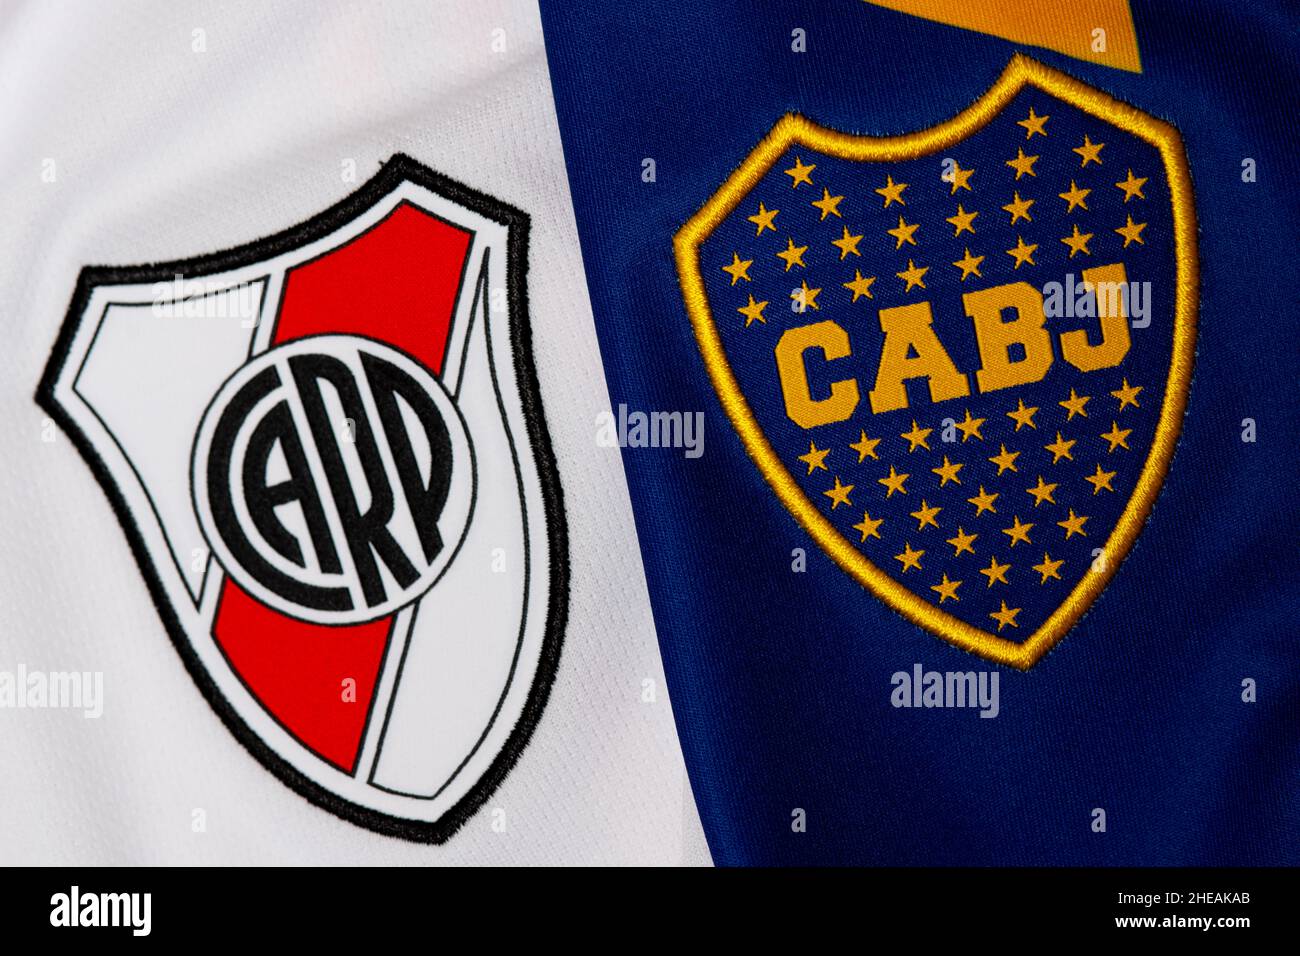 Close up of Boca Juniors and River Plate football jersey. Superclásico is the football match in Argentina between Buenos Aires rivals Boca and River. Stock Photo